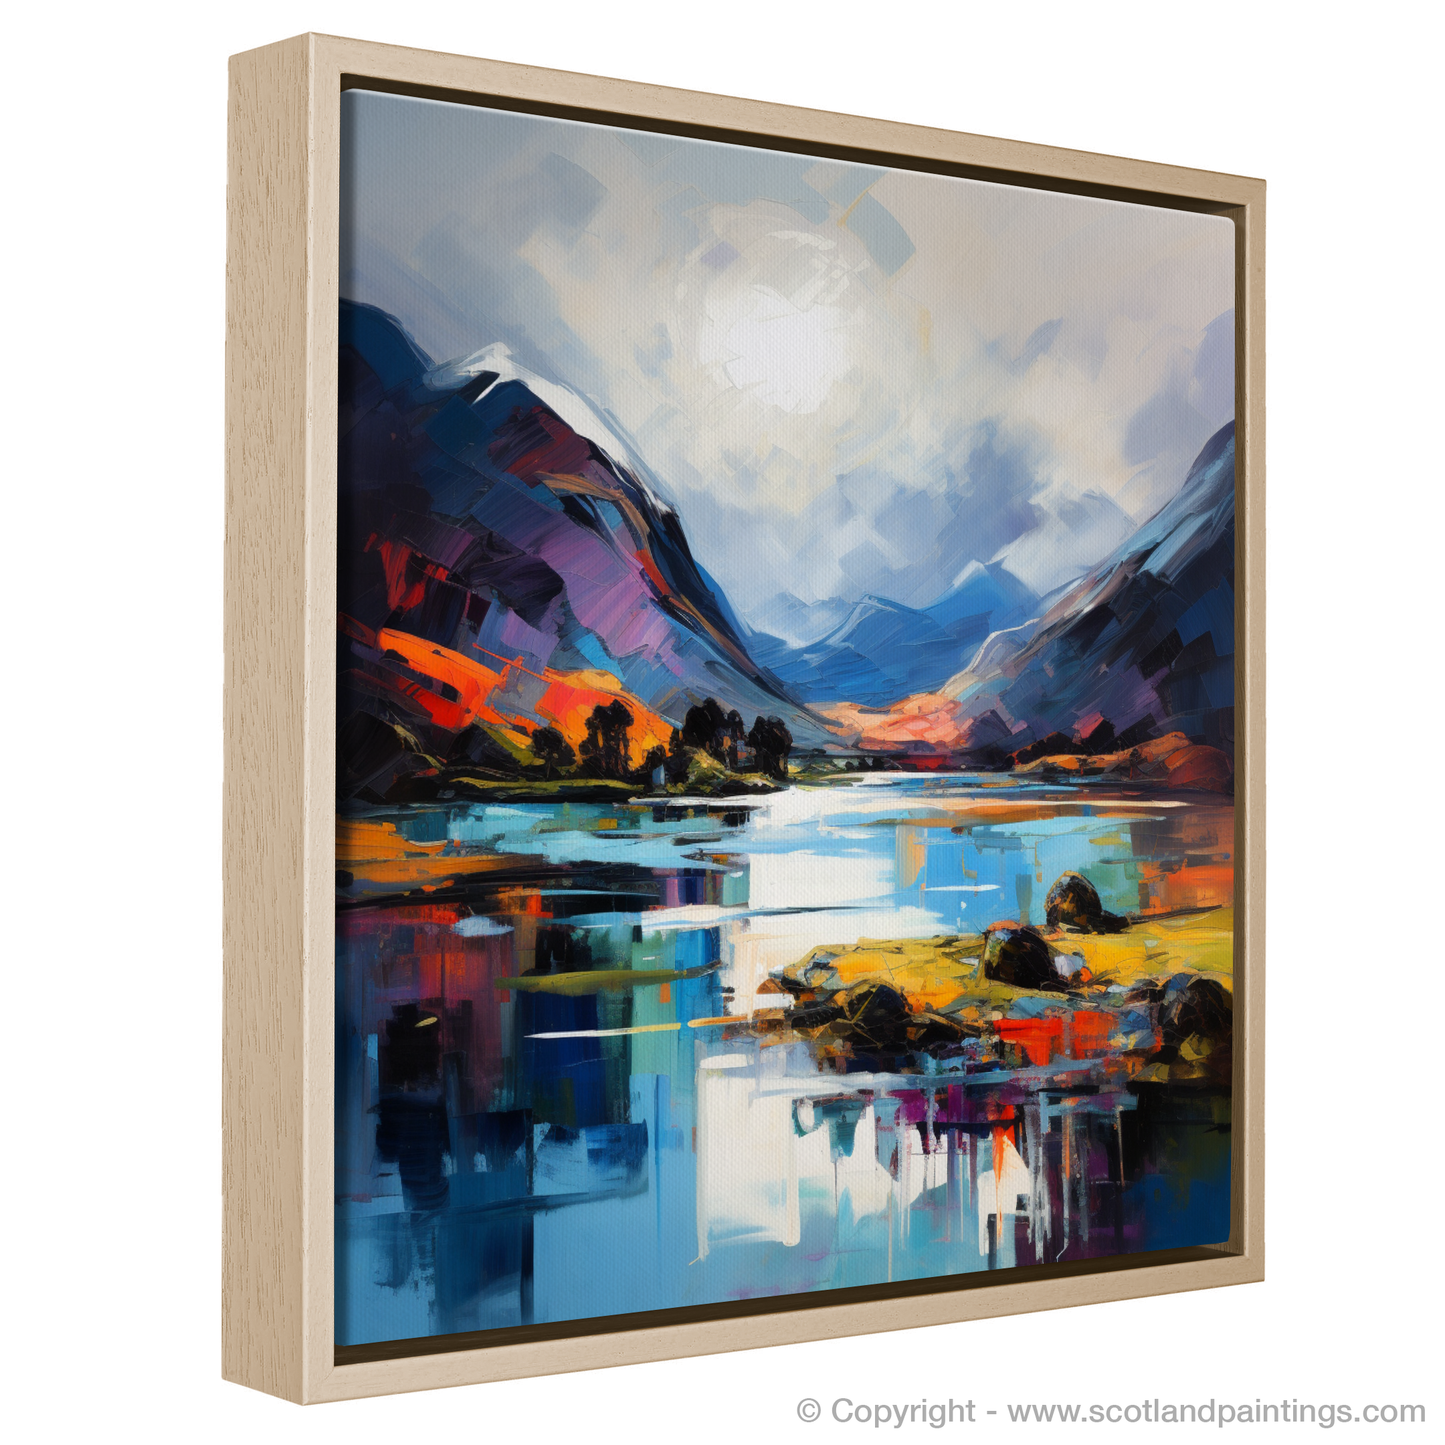 Painting and Art Print of Loch Shiel, Highlands entitled "Highland Emotions: An Expressionist Ode to Loch Shiel".